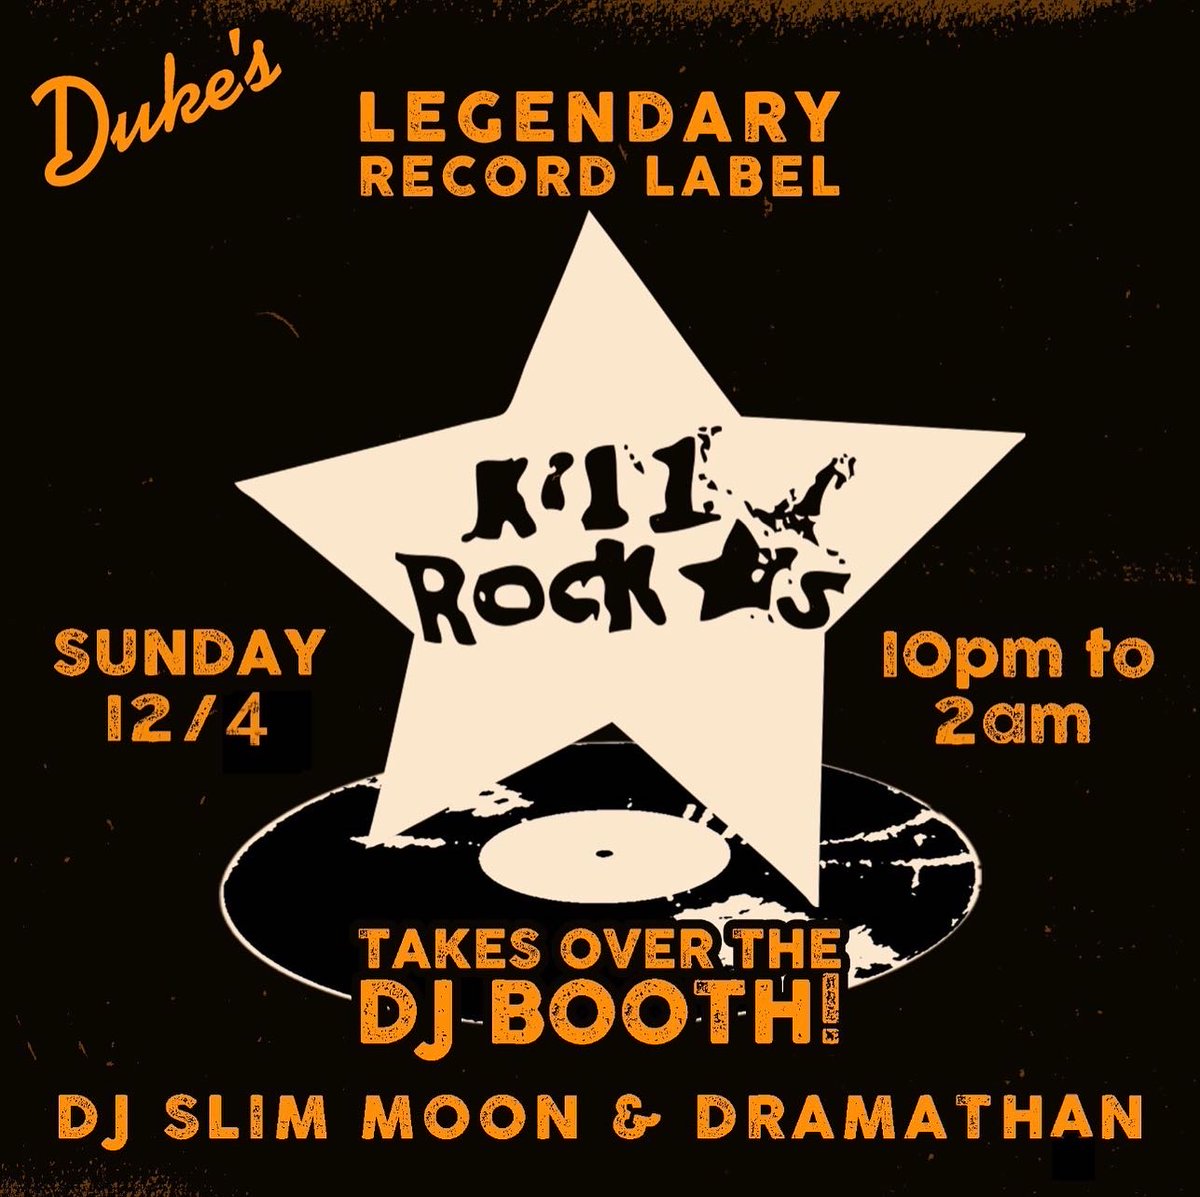 Come party with KRS in Nashville this Sunday 12/4 at Duke's! With DJ sets by Slim Moon + Dramathan!